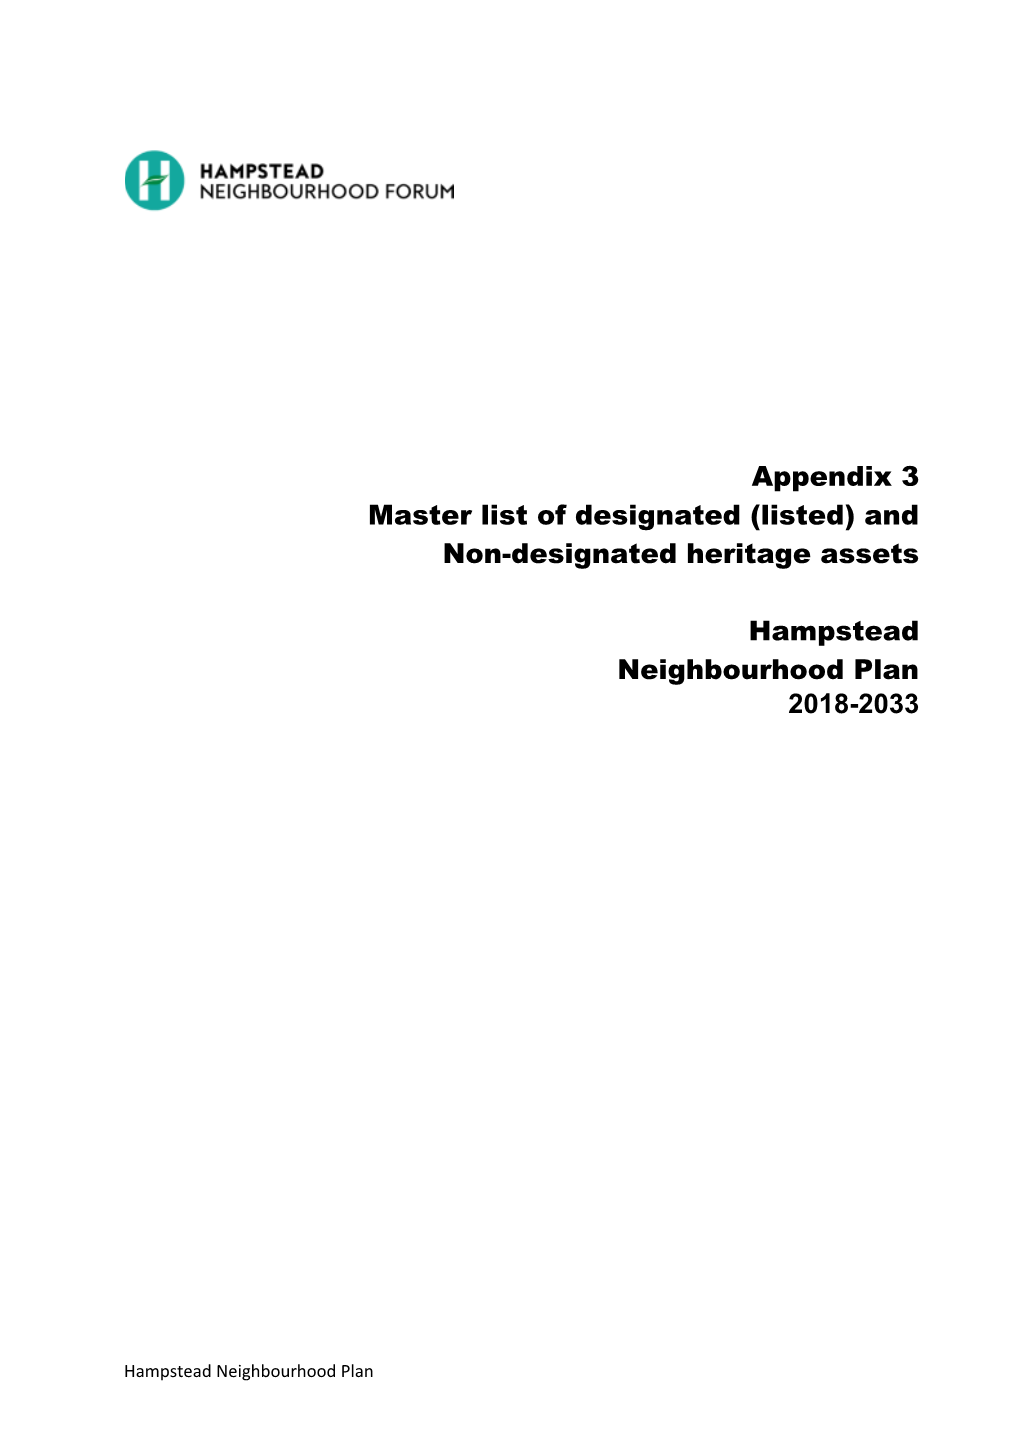 Appendix 3 Master List of Designated (Listed) and Non-Designated Heritage Assets